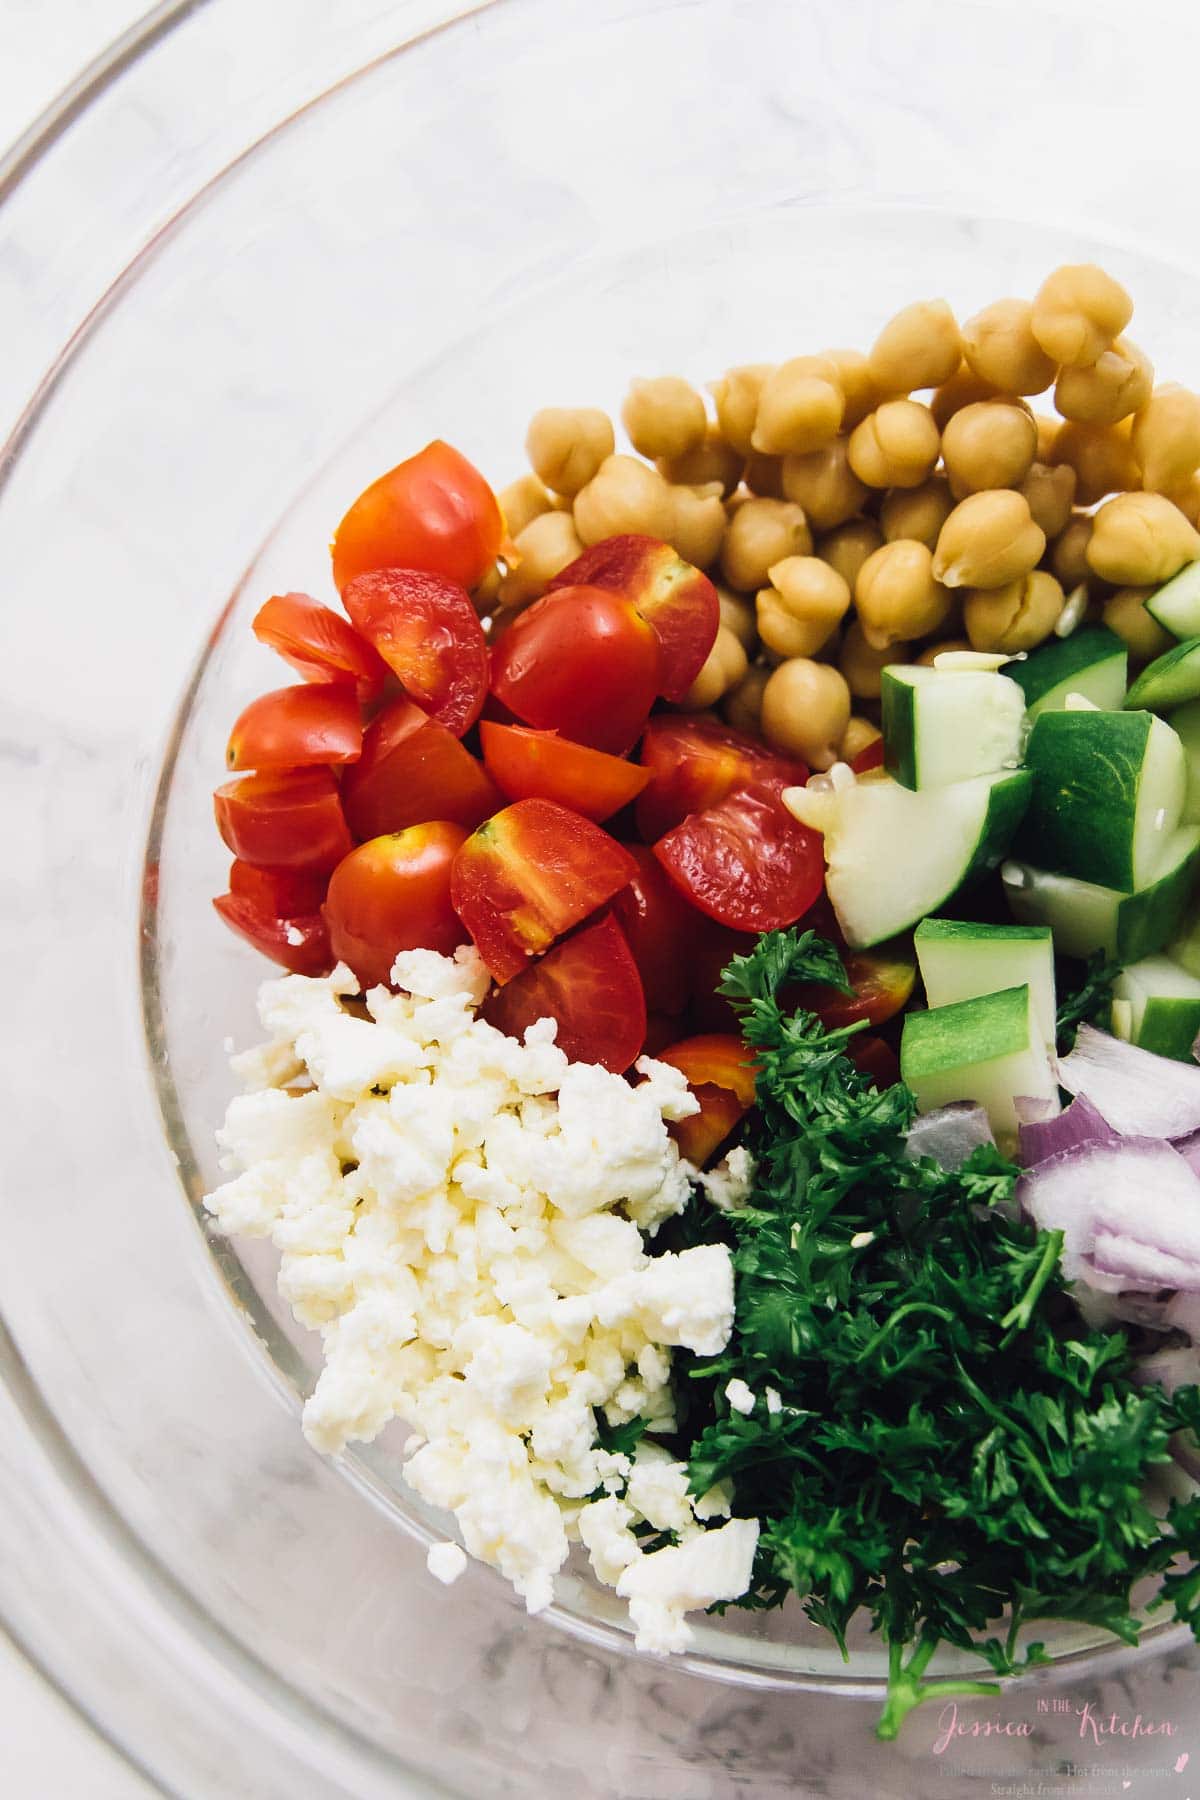 This 15-Minute Mediterranean Chickpea Salad is loaded with delicious and filling veggies, made in just 15 minutes and is perfect for meal prep! via https://jessicainthekitchen.com